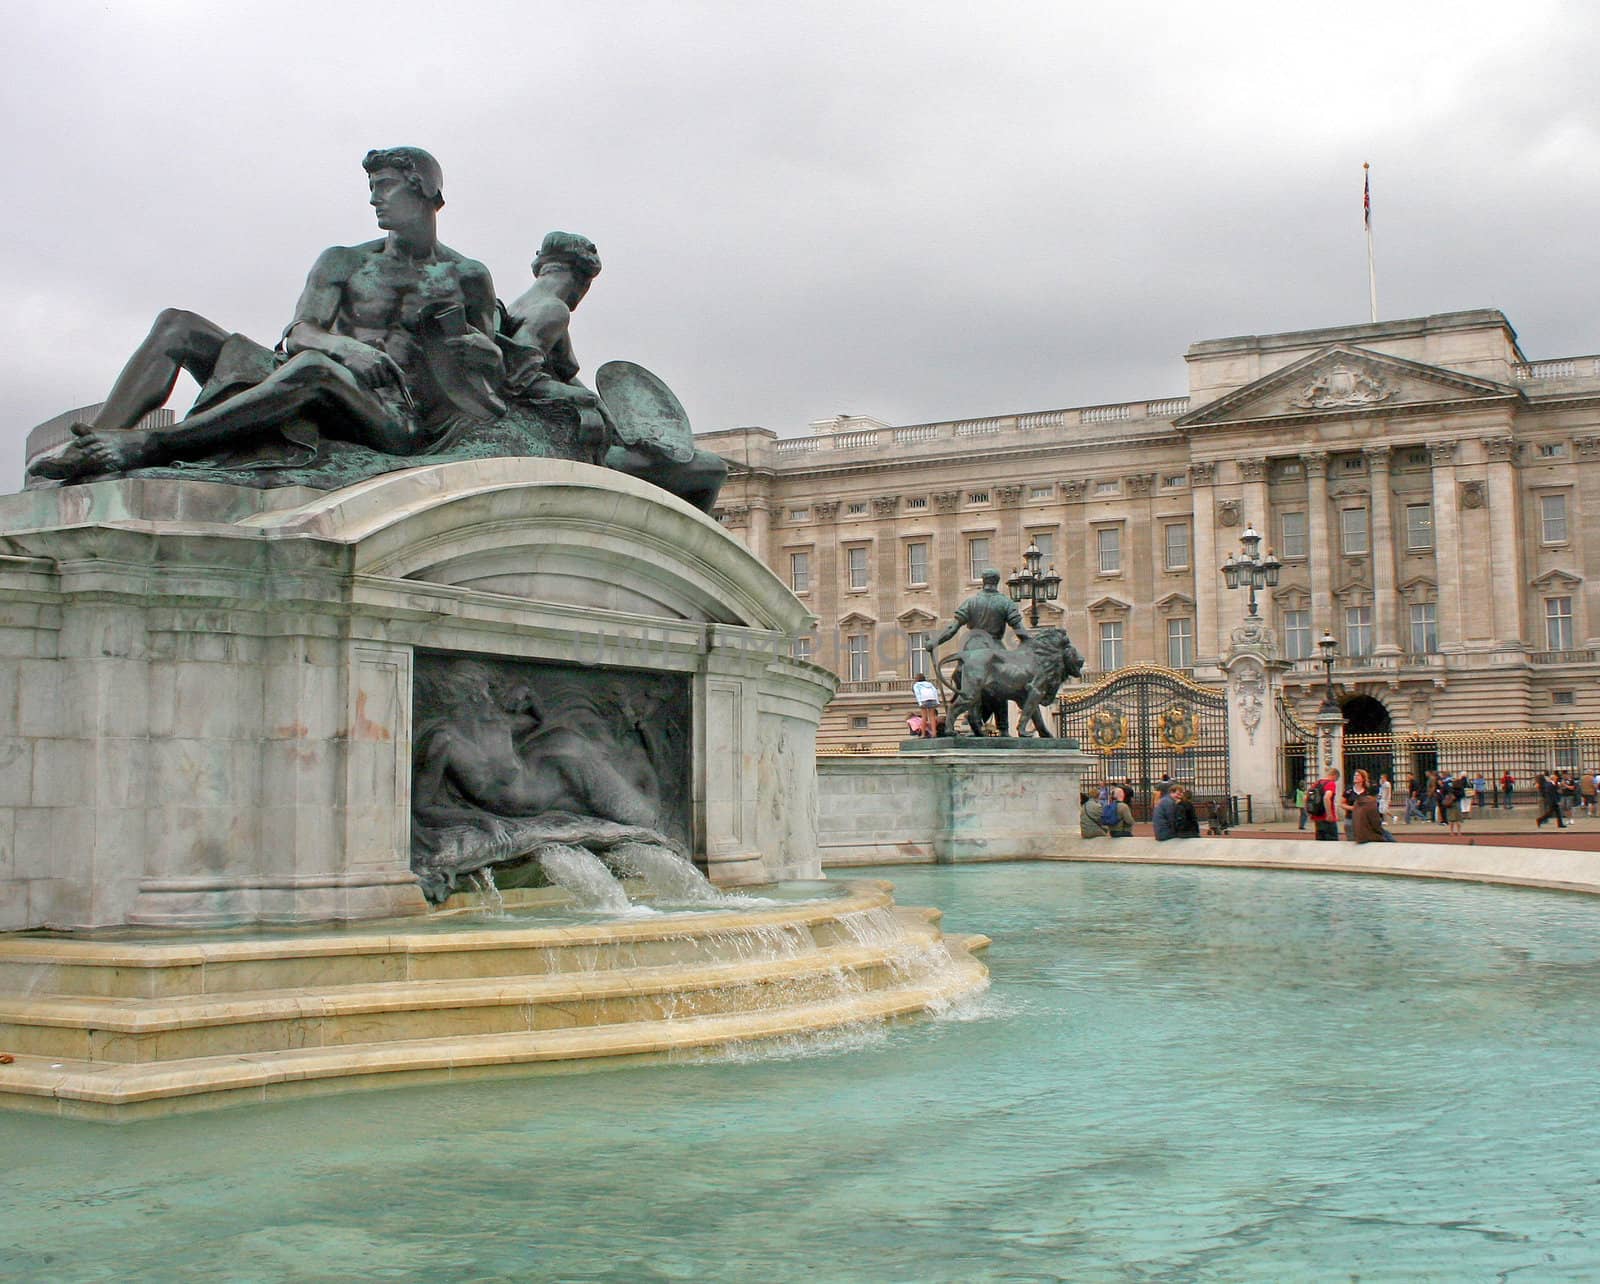 Ancient Building, statues and fountain in London UK.